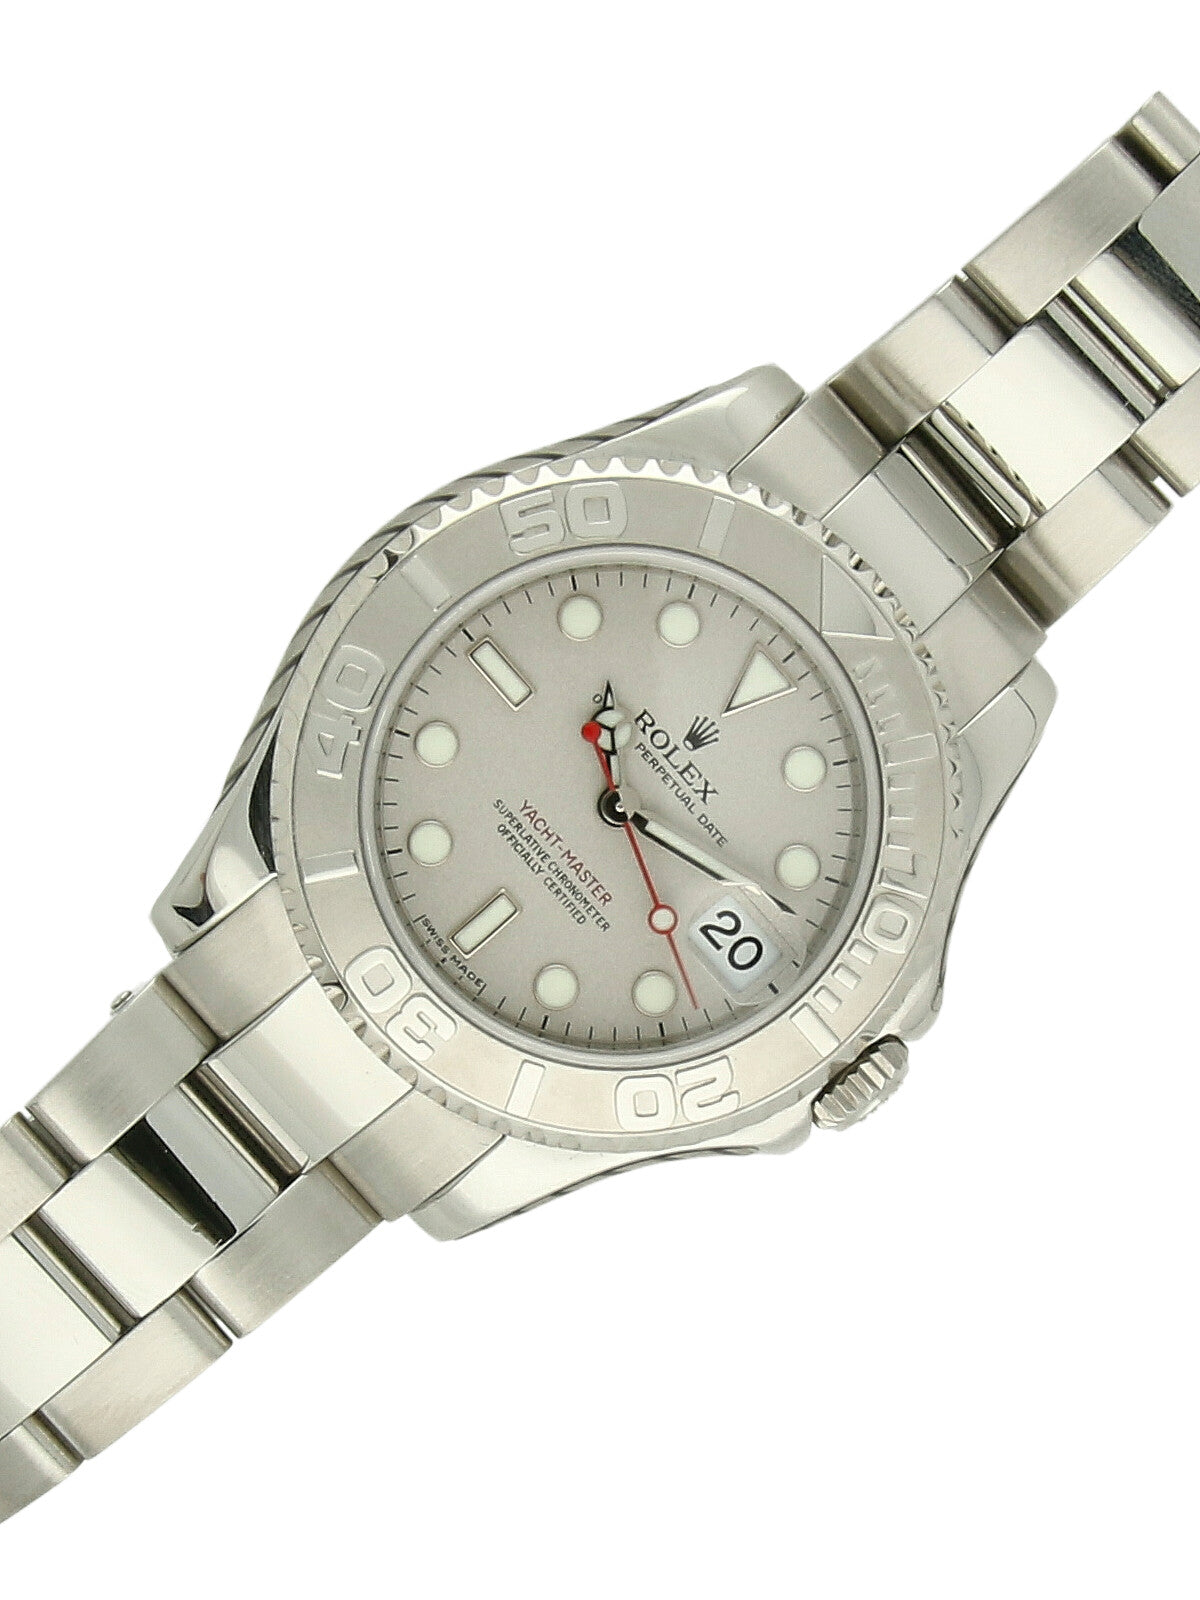 Pre Owned Rolex Yacht-Master Steel Automatic 35mm Watch on Oyster Bracelet